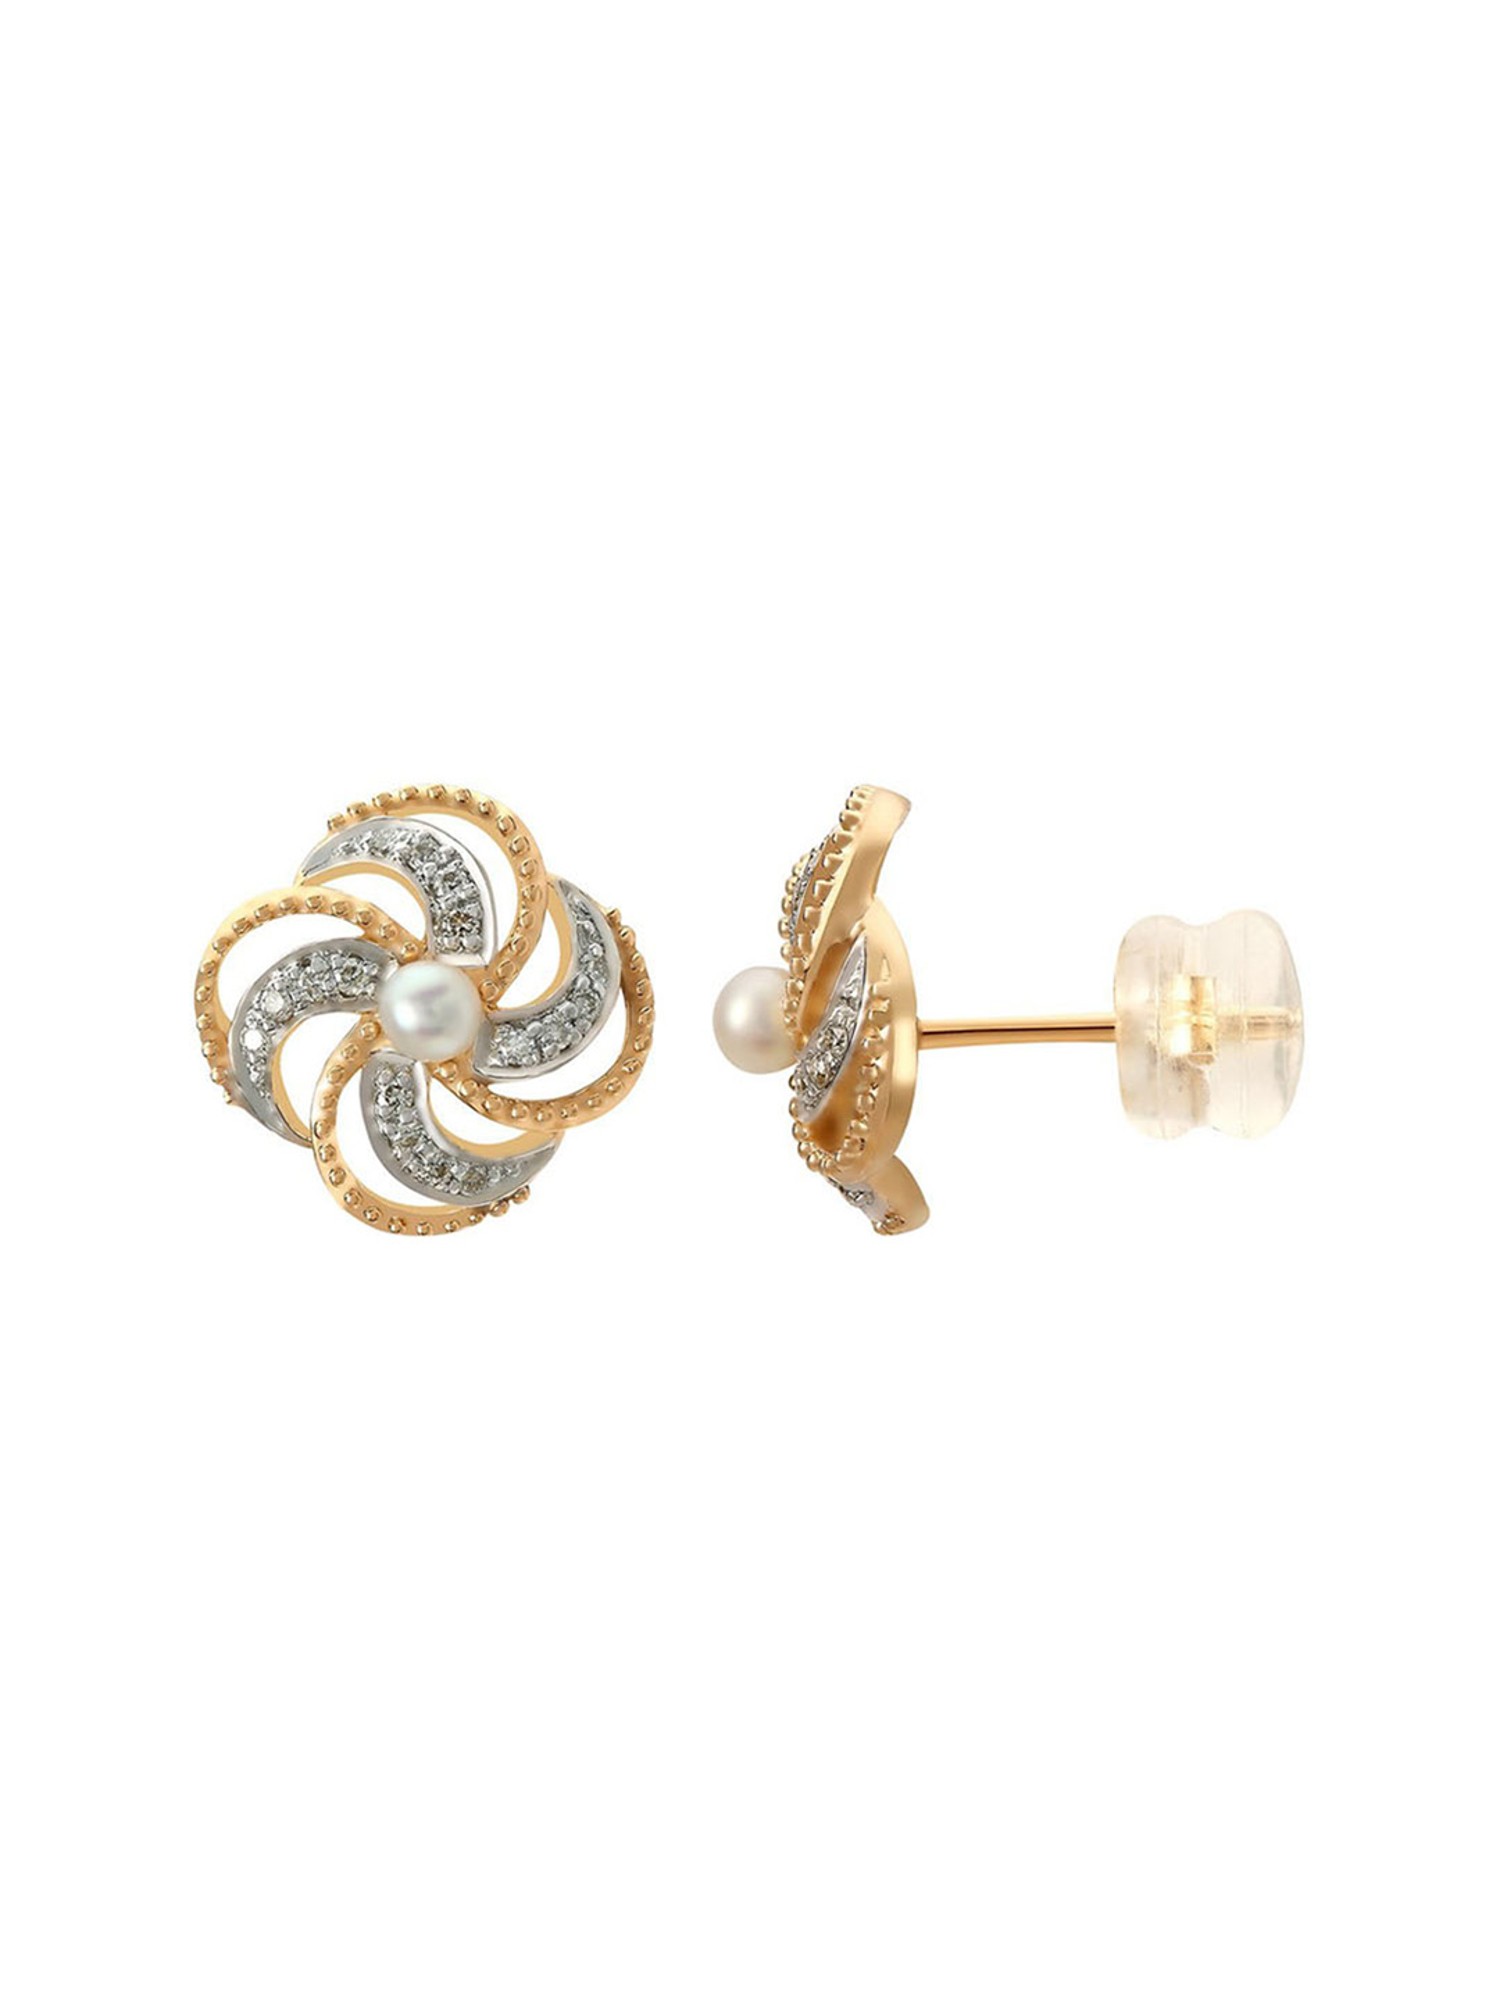 Mia by Tanishq 14k (585) Yellow Gold and Diamond Stud Earrings for Women :  Amazon.in: Fashion